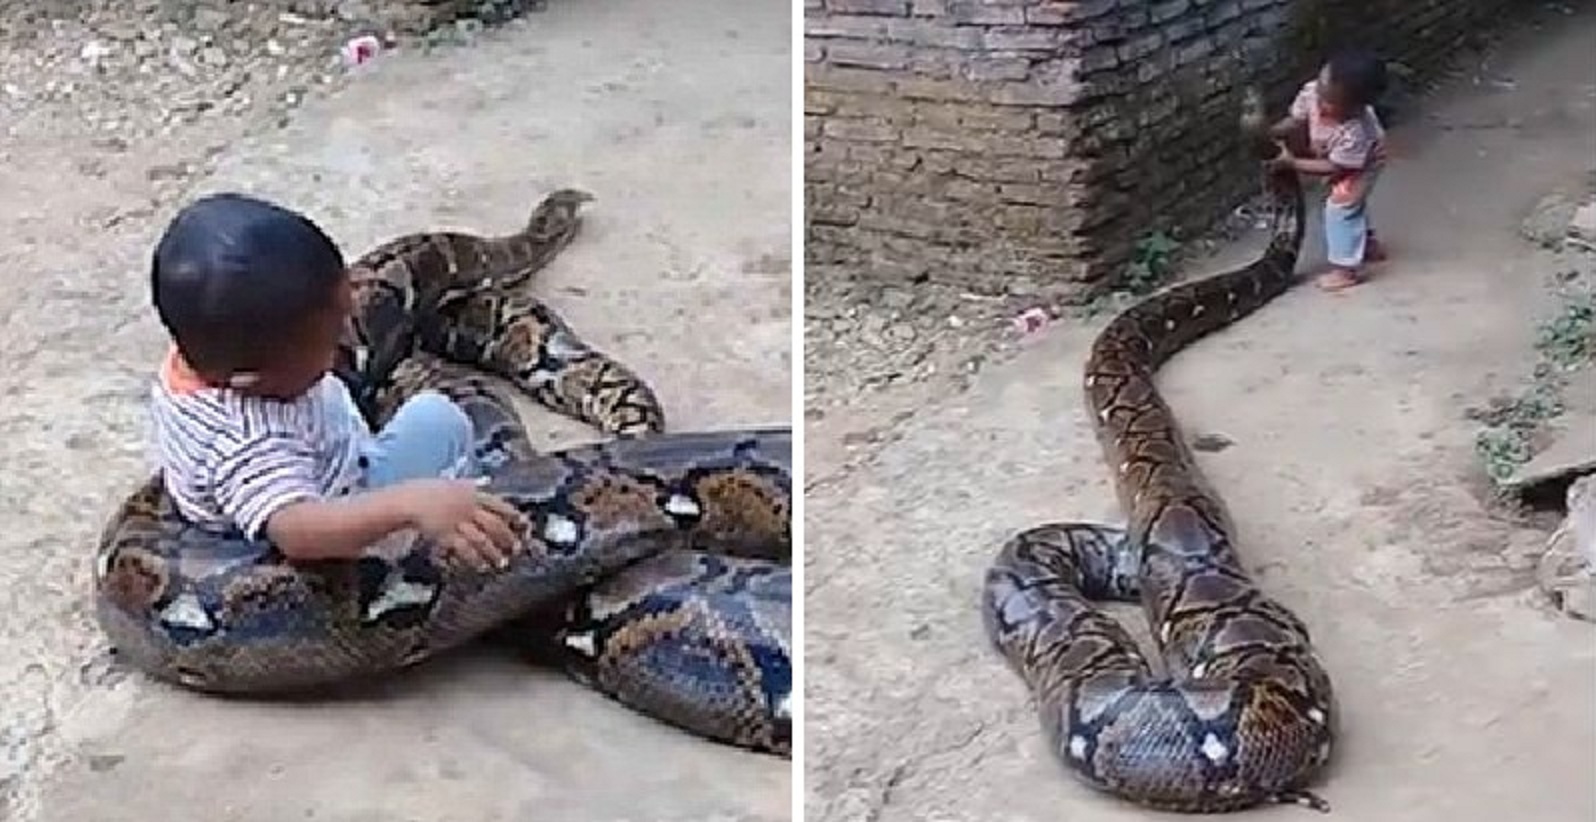 Viral Video Shows A Toddler Playing with a Giant Python Like Its a “Soft-Toy”